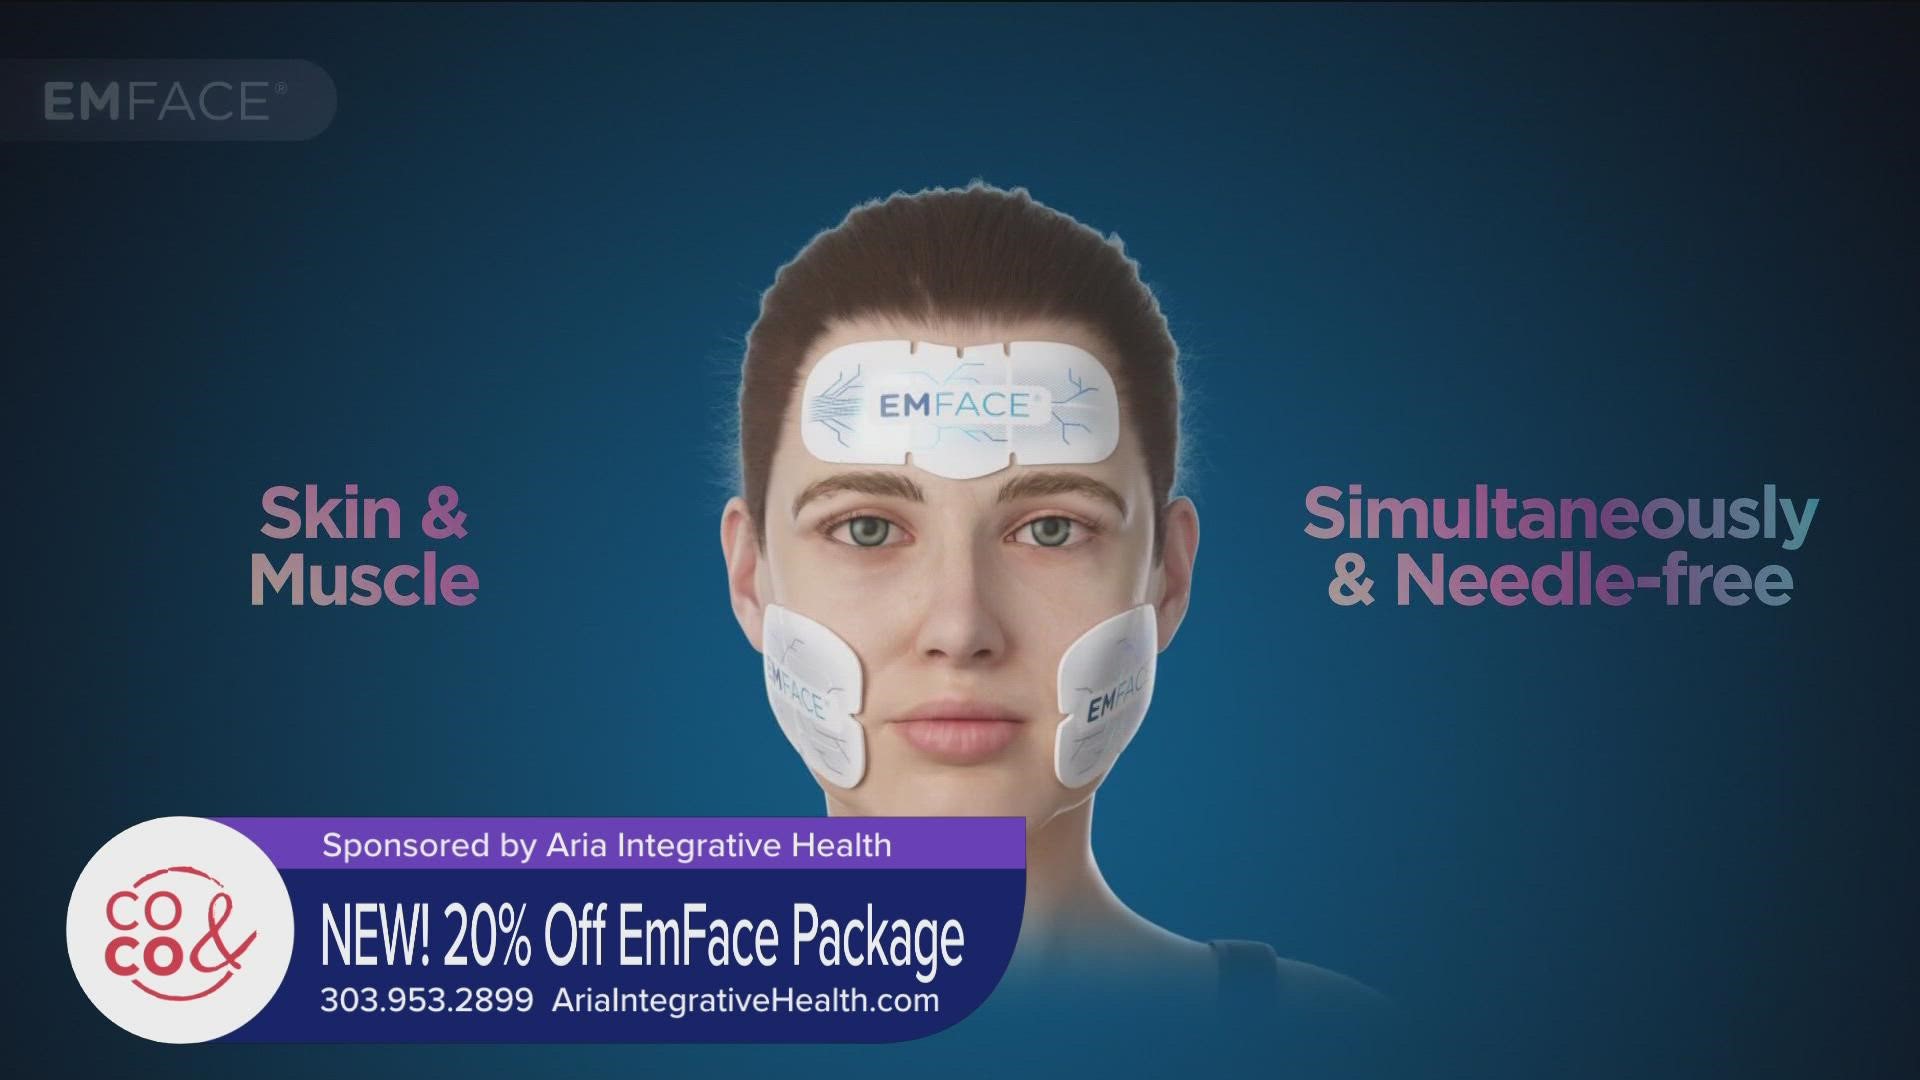 Call 303.953.2899 or visit AriaIntegrativeHealth.com to get started with 20% off an EmFace treatment package and free consultation! **PAID CONTENT**